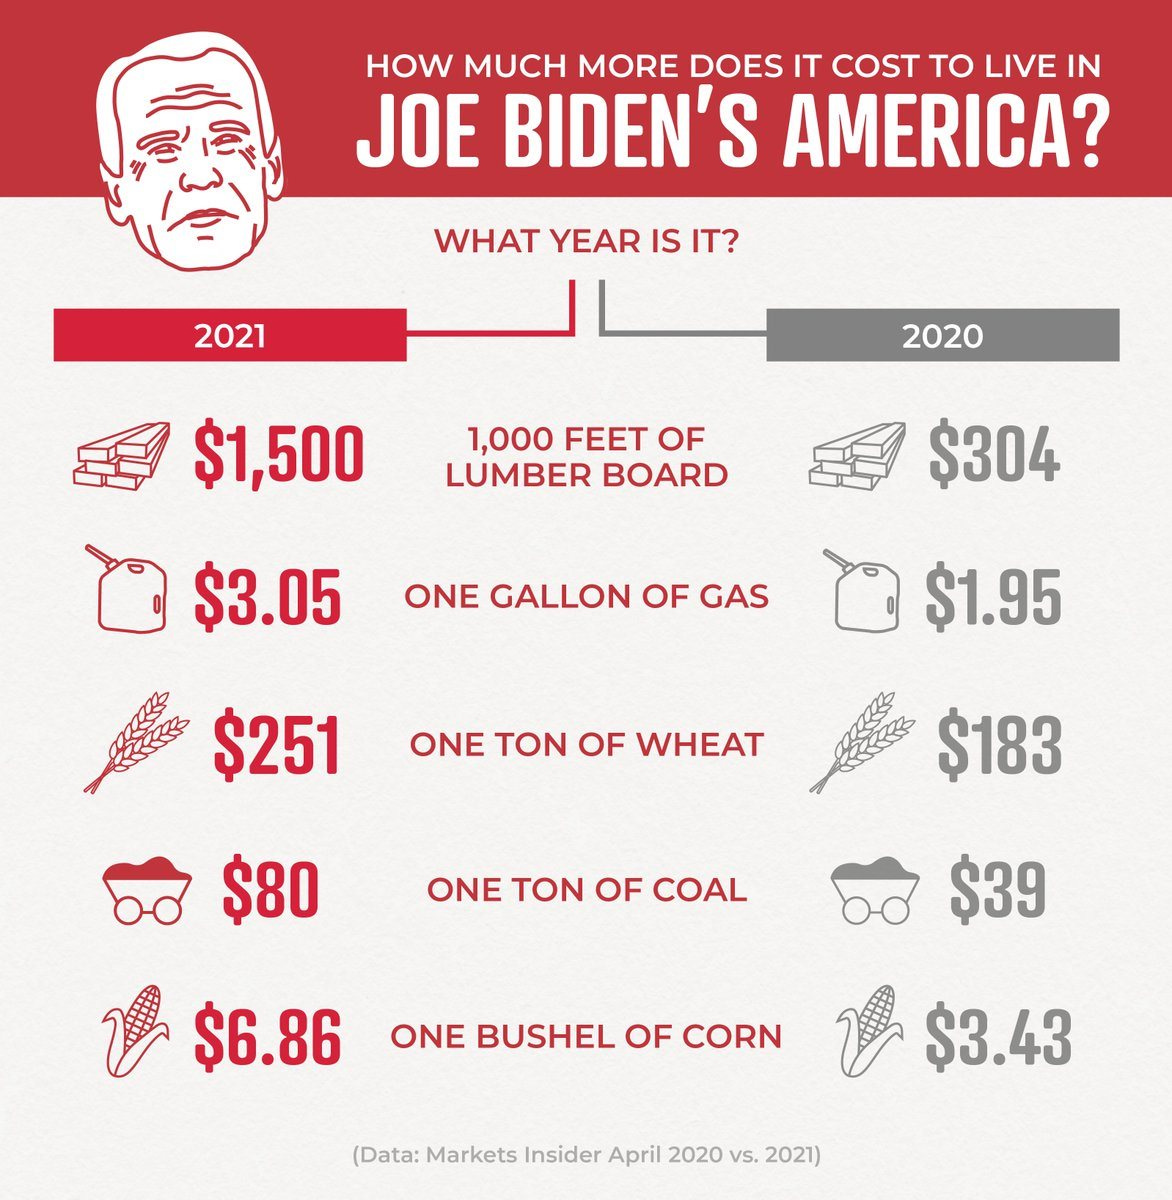 May be an image of 1 person and text that says 'HOW MUCH MORE DOES IT COST TO LIVE IN JOE BIDEN'S AMERICA? WHAT YEAR IS IT? 2021 2020 $1,500 1,000 FEET OF LUMBER BOARD $304 $3.05 ONE GALLON OF GAS $1.95 $251 ONE ΤΟΝ OF WHEAT $80 $183 ONE TON OF COAL 1 $6.86 $39 ONE BUSHEL OF CORN 1 $3.43 (Data: Markets Insider April 2020 vs. 2021)'